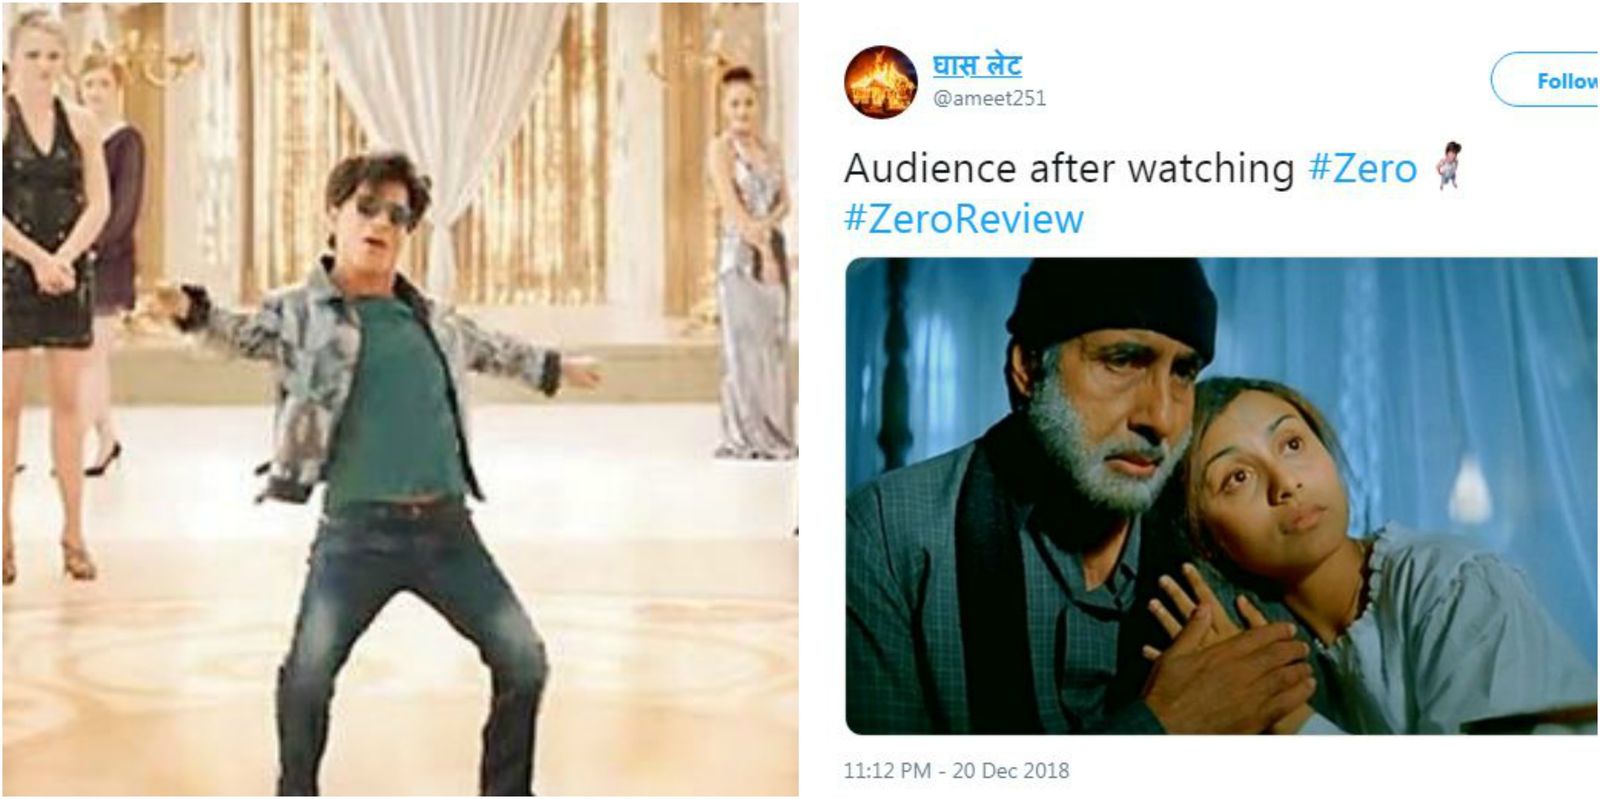 Twitter Reactions for Zero - Some Twitteratis Express Their Displeasure In Hilarious Ways